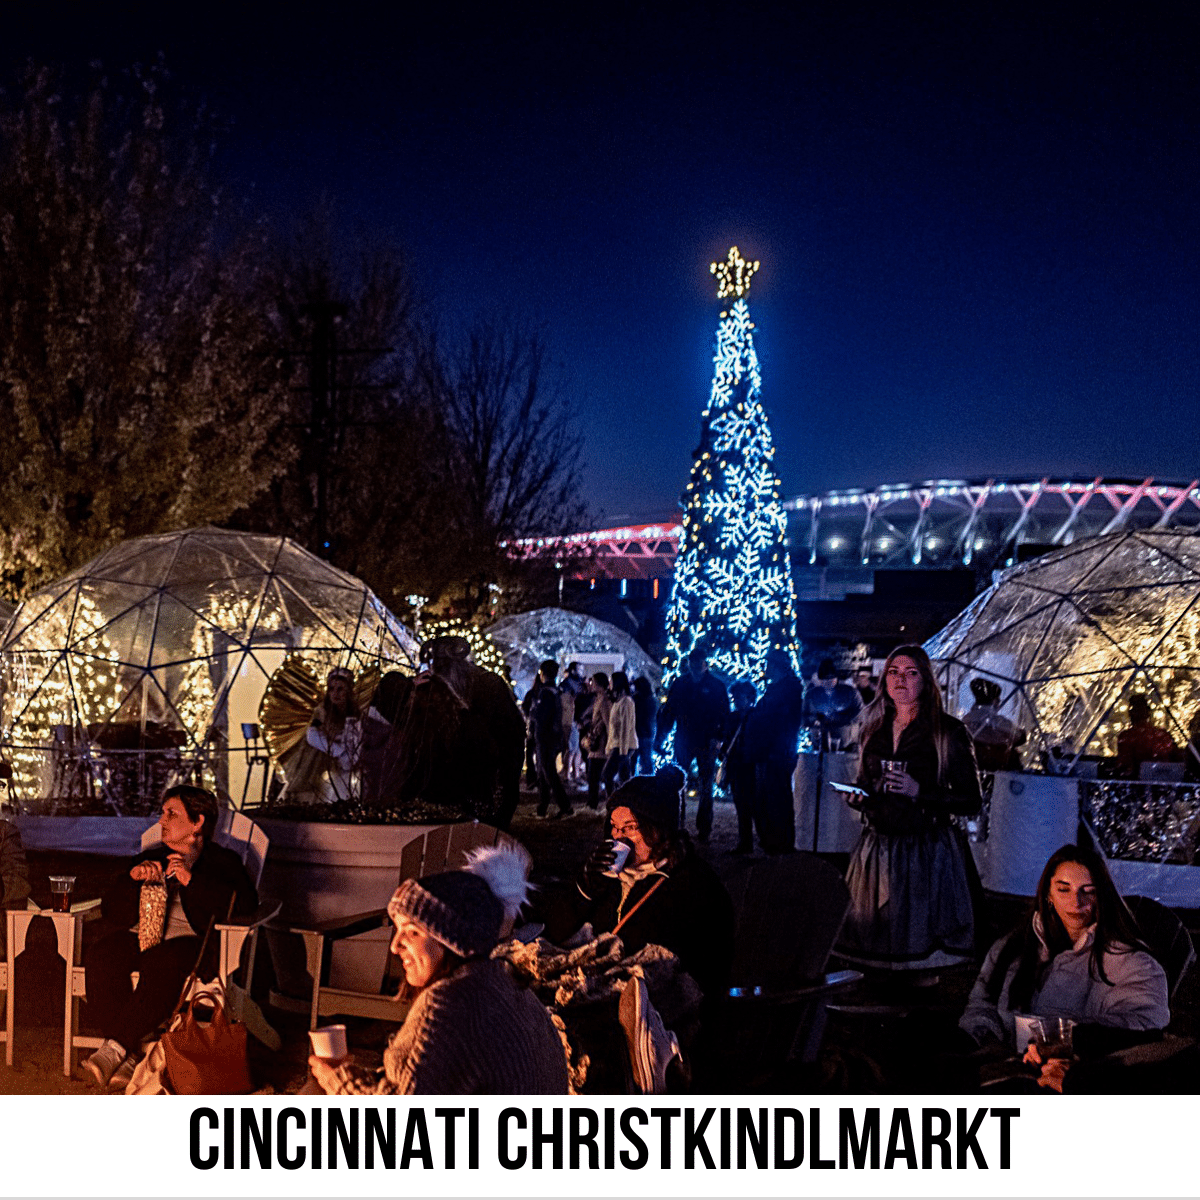 square image with a photo of the Cincinnati Christkindlmarkt with lit igloos and the lit Christmas tree and people sitting around an open fire in the foreground. A white strip across the bottom has the text Cincinnati Christkindlmarkt. Image courtesy of Cincinnati Christkindlmarkt